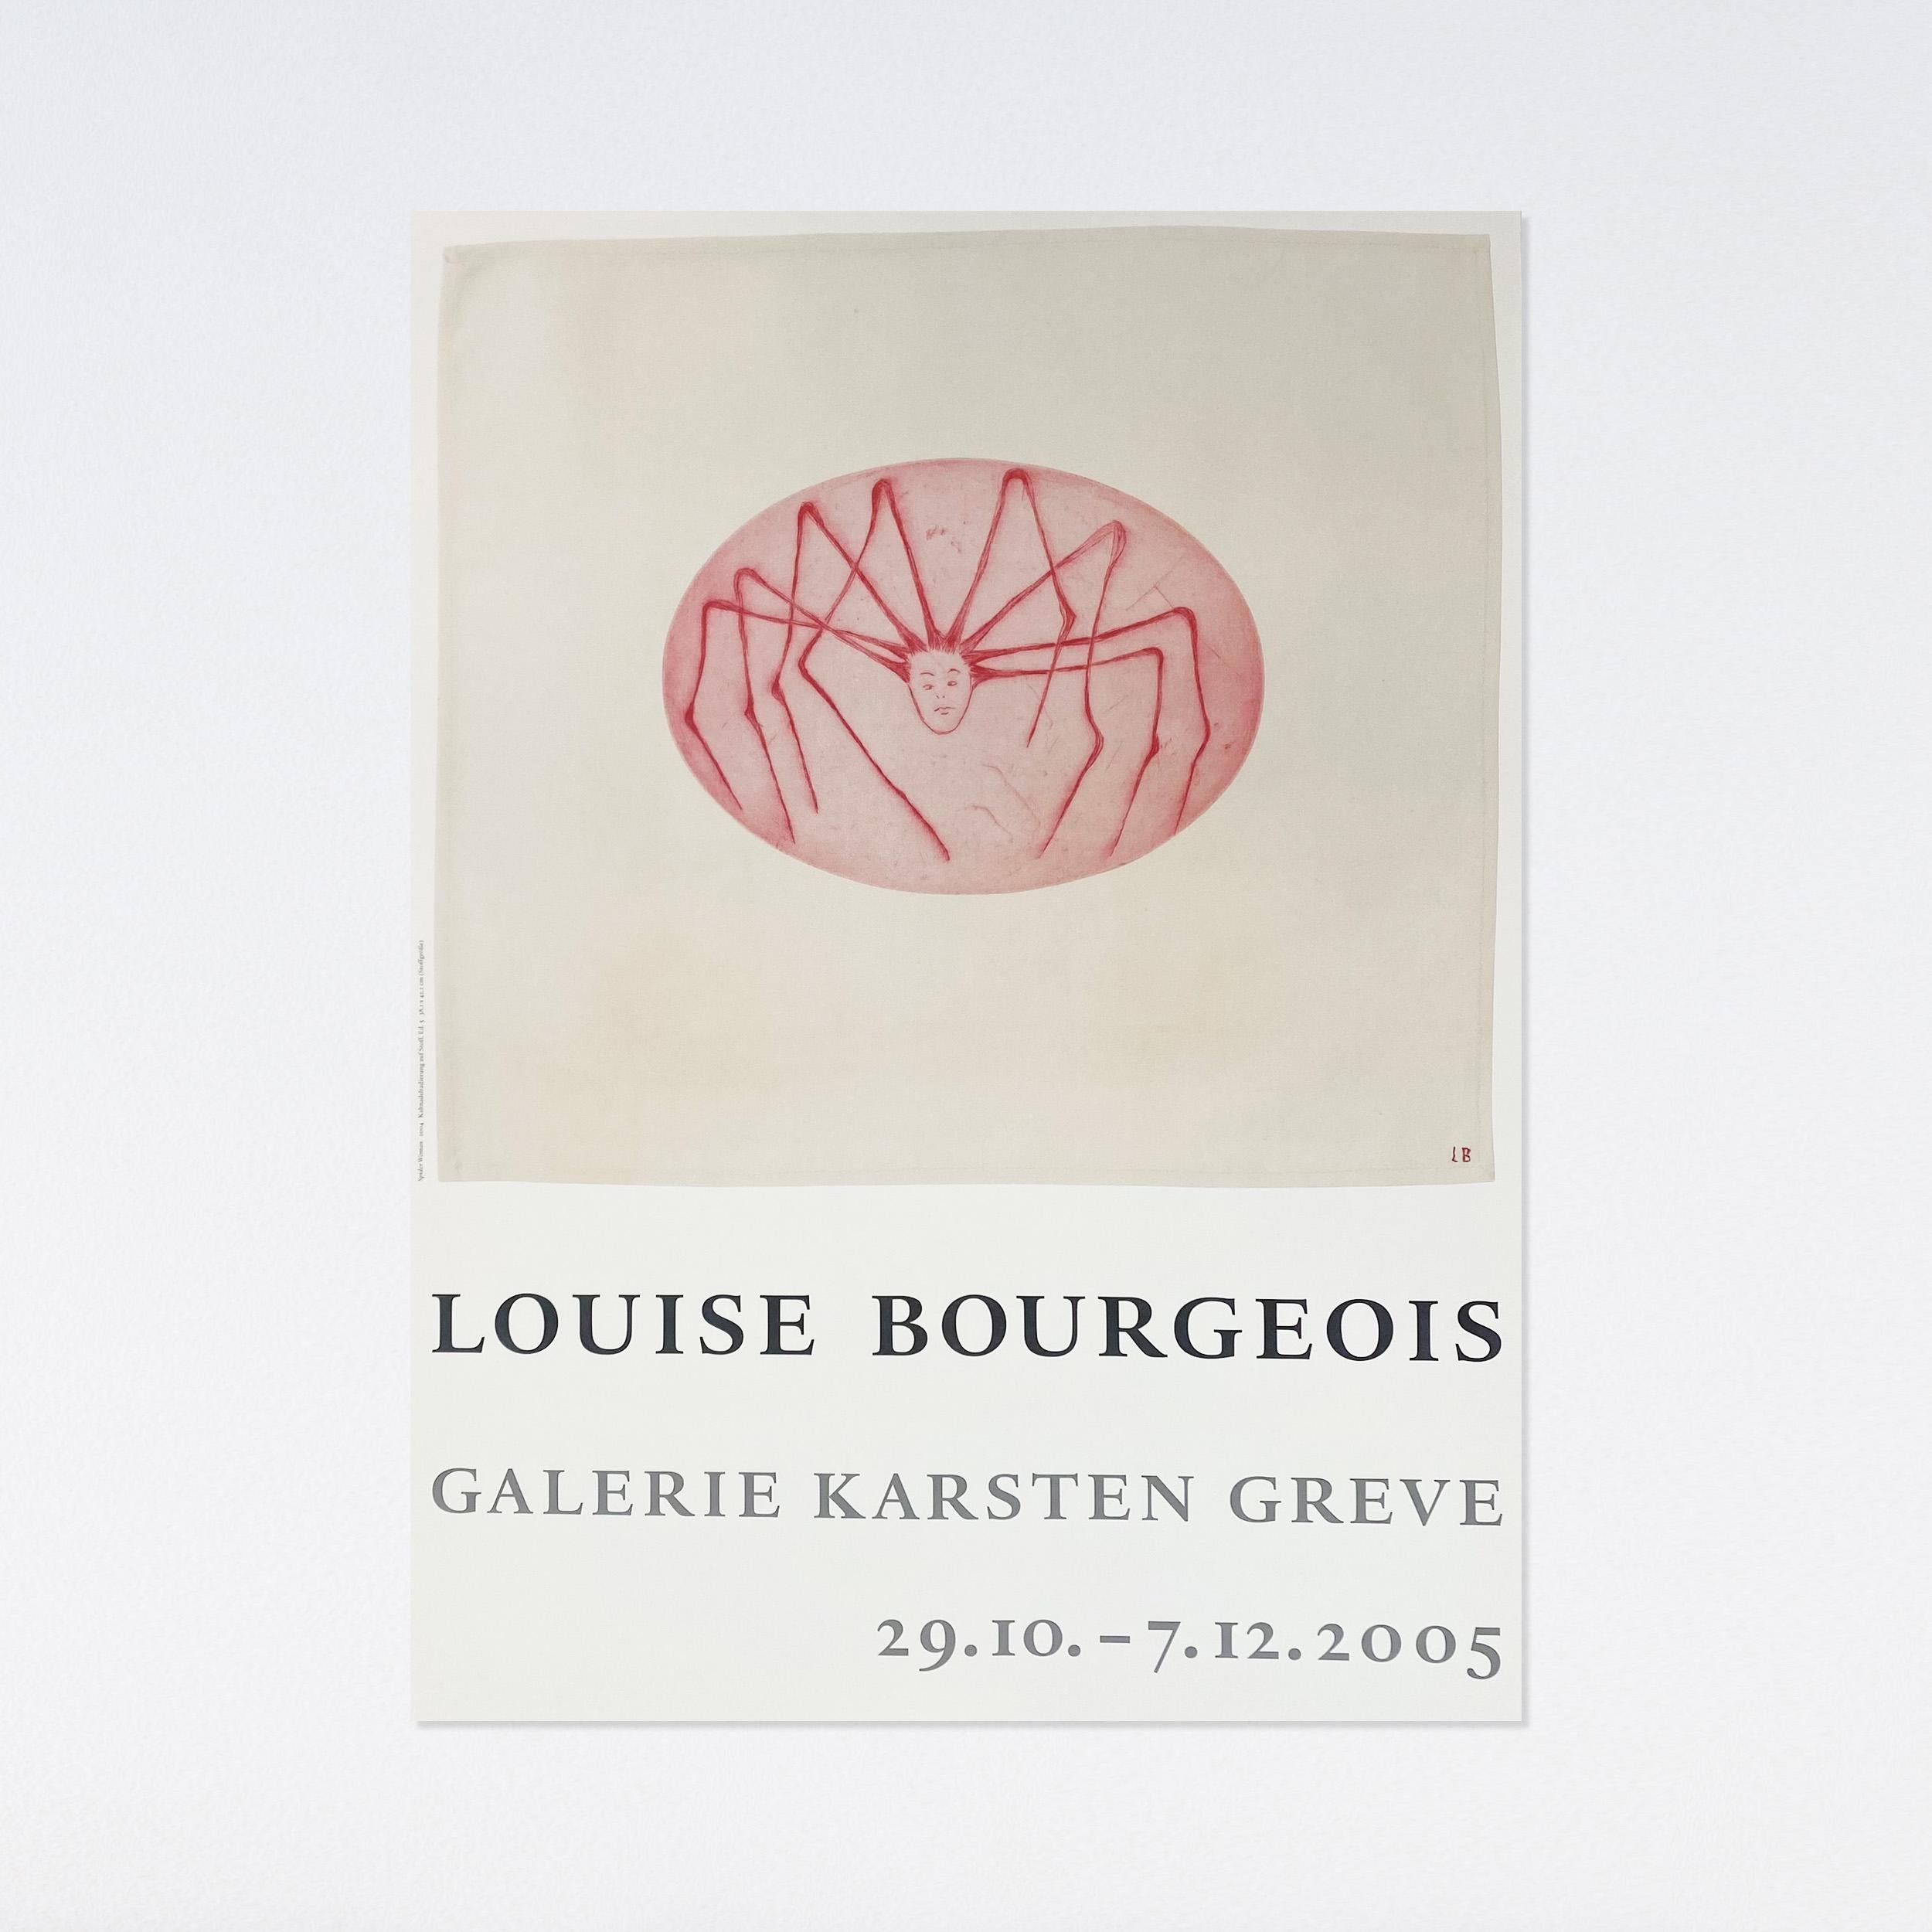 A poster made on the occasion of Louise Bourgeois's 2005 exhibition at Galerie Karsten Greve Köln in Germany.

32 x 23.5 in
81.28 x 59.69 cm

Louise Bourgeois was a French-American artist. Although she is best known for her large-scale sculpture and